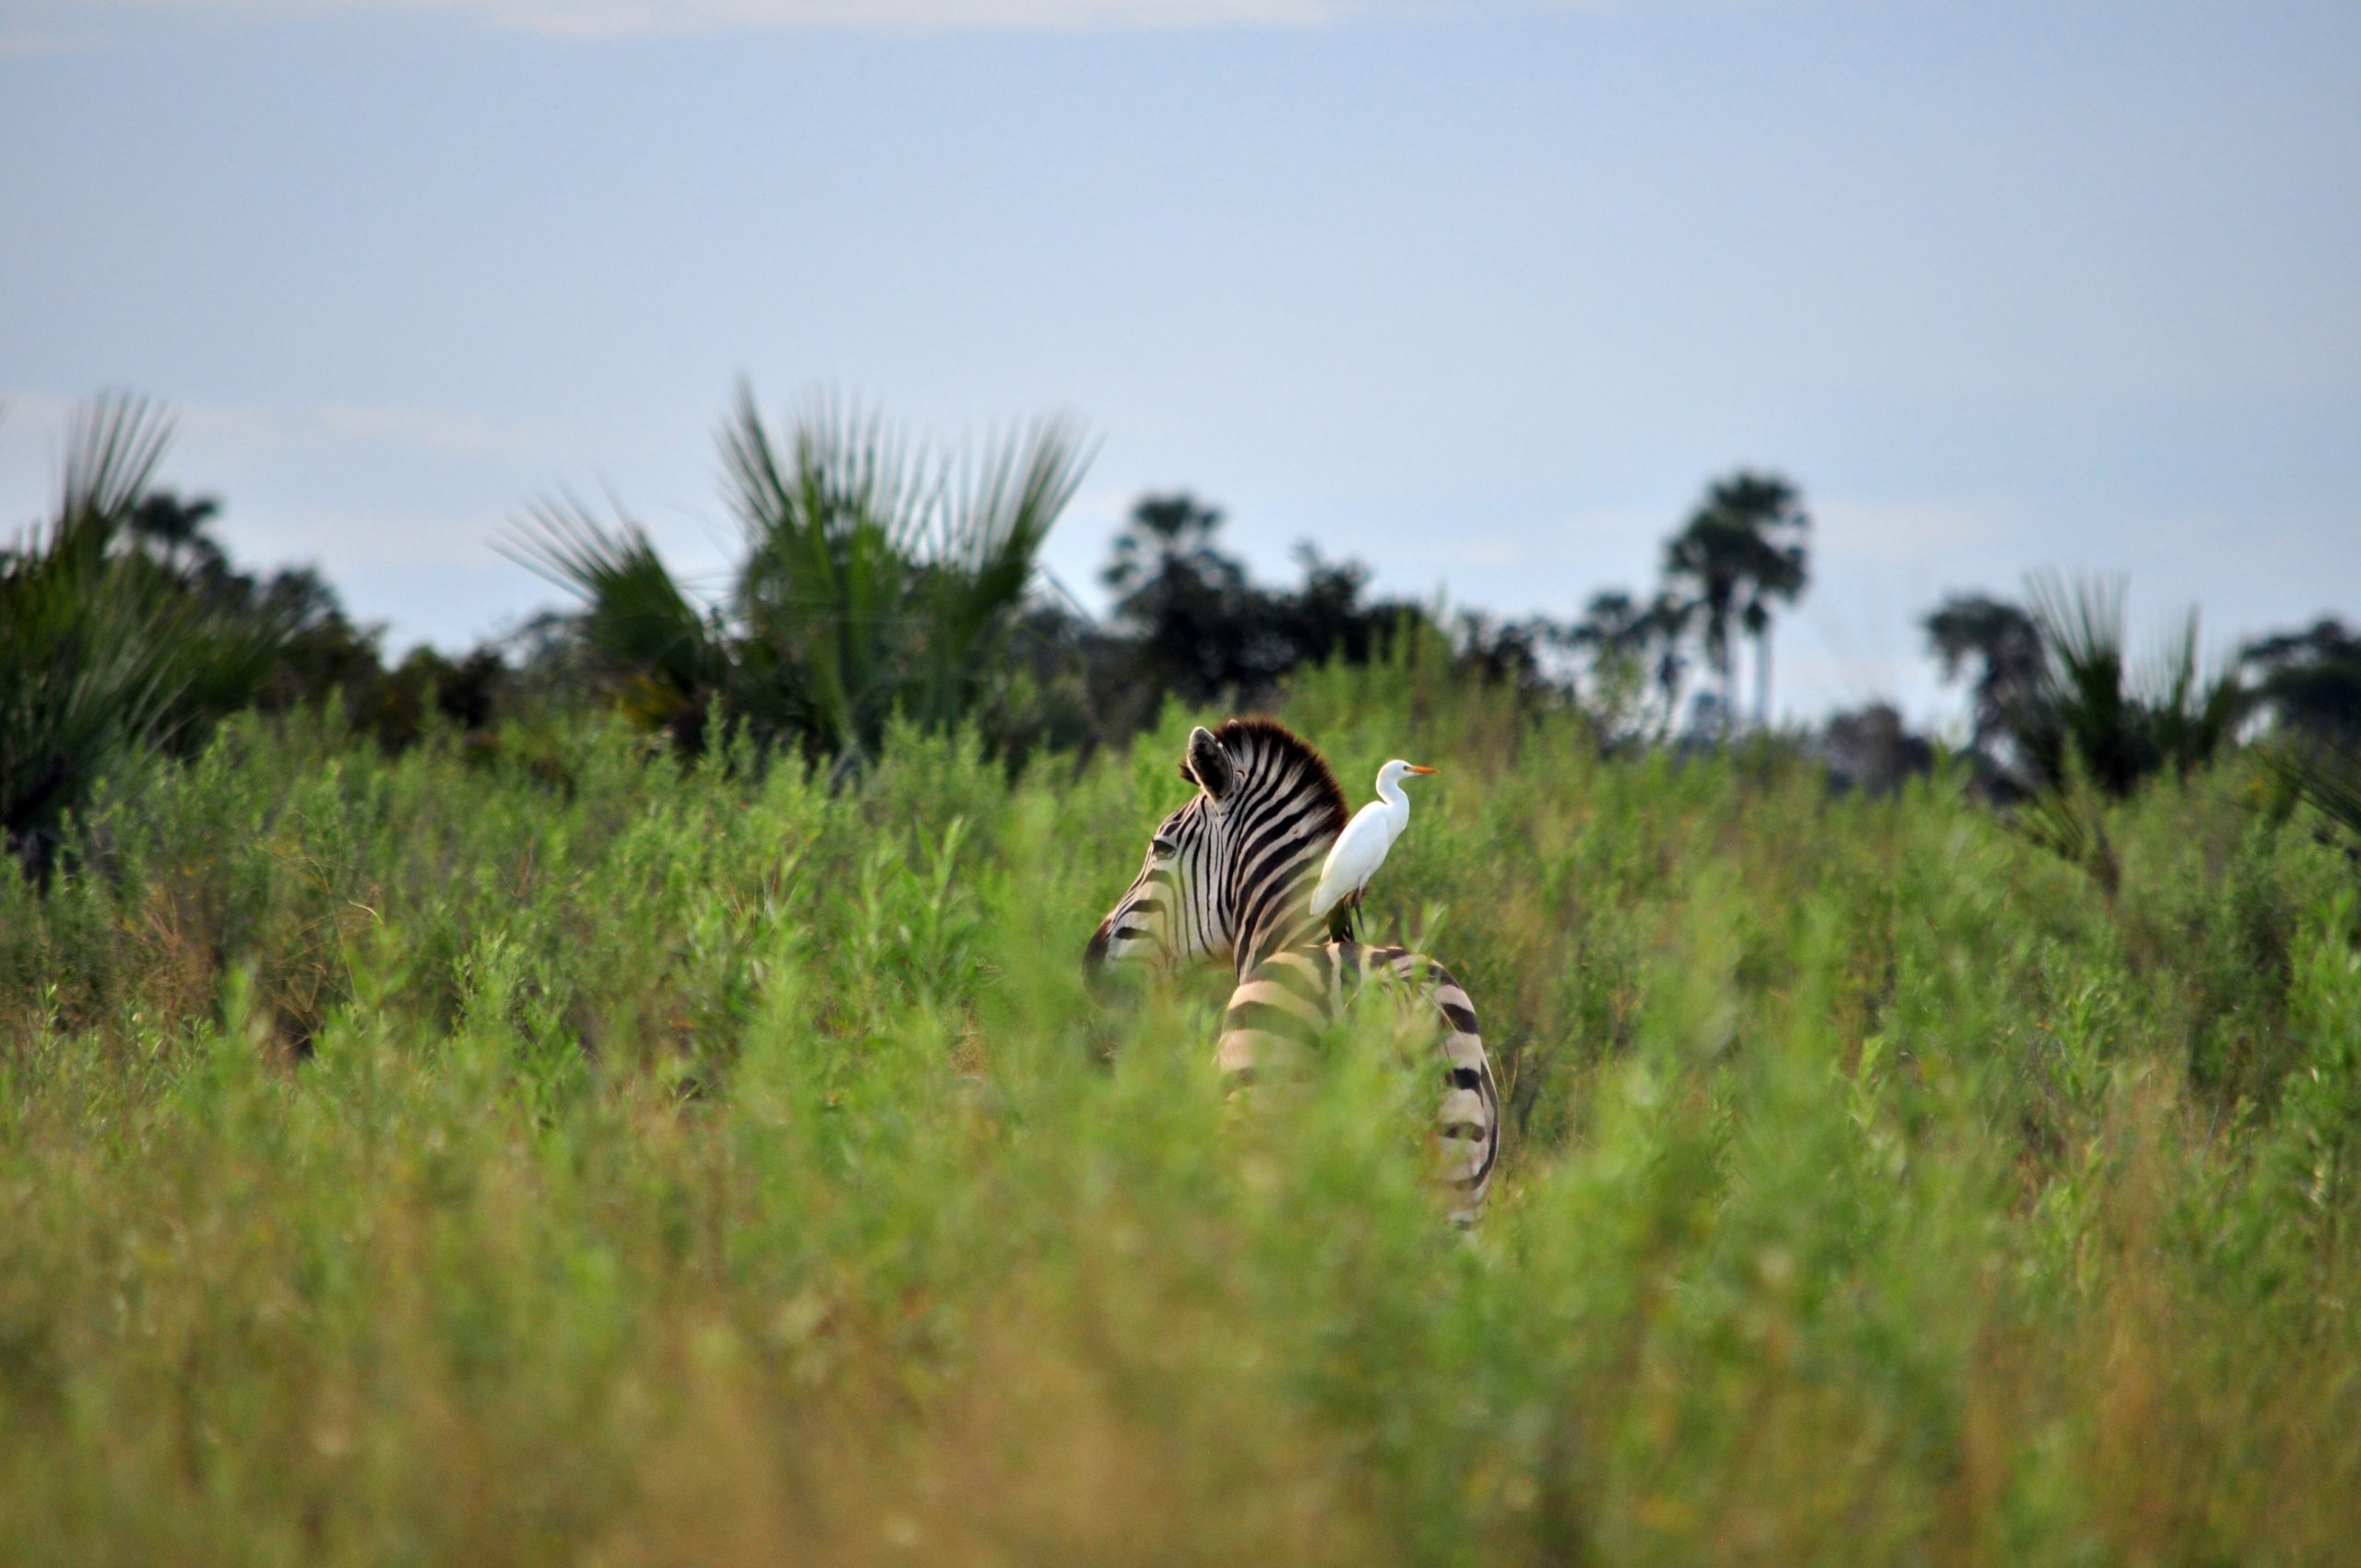 Cattle egret perched on top of a zebra standing in tall grass at Moremi Game Reserve in Botswana